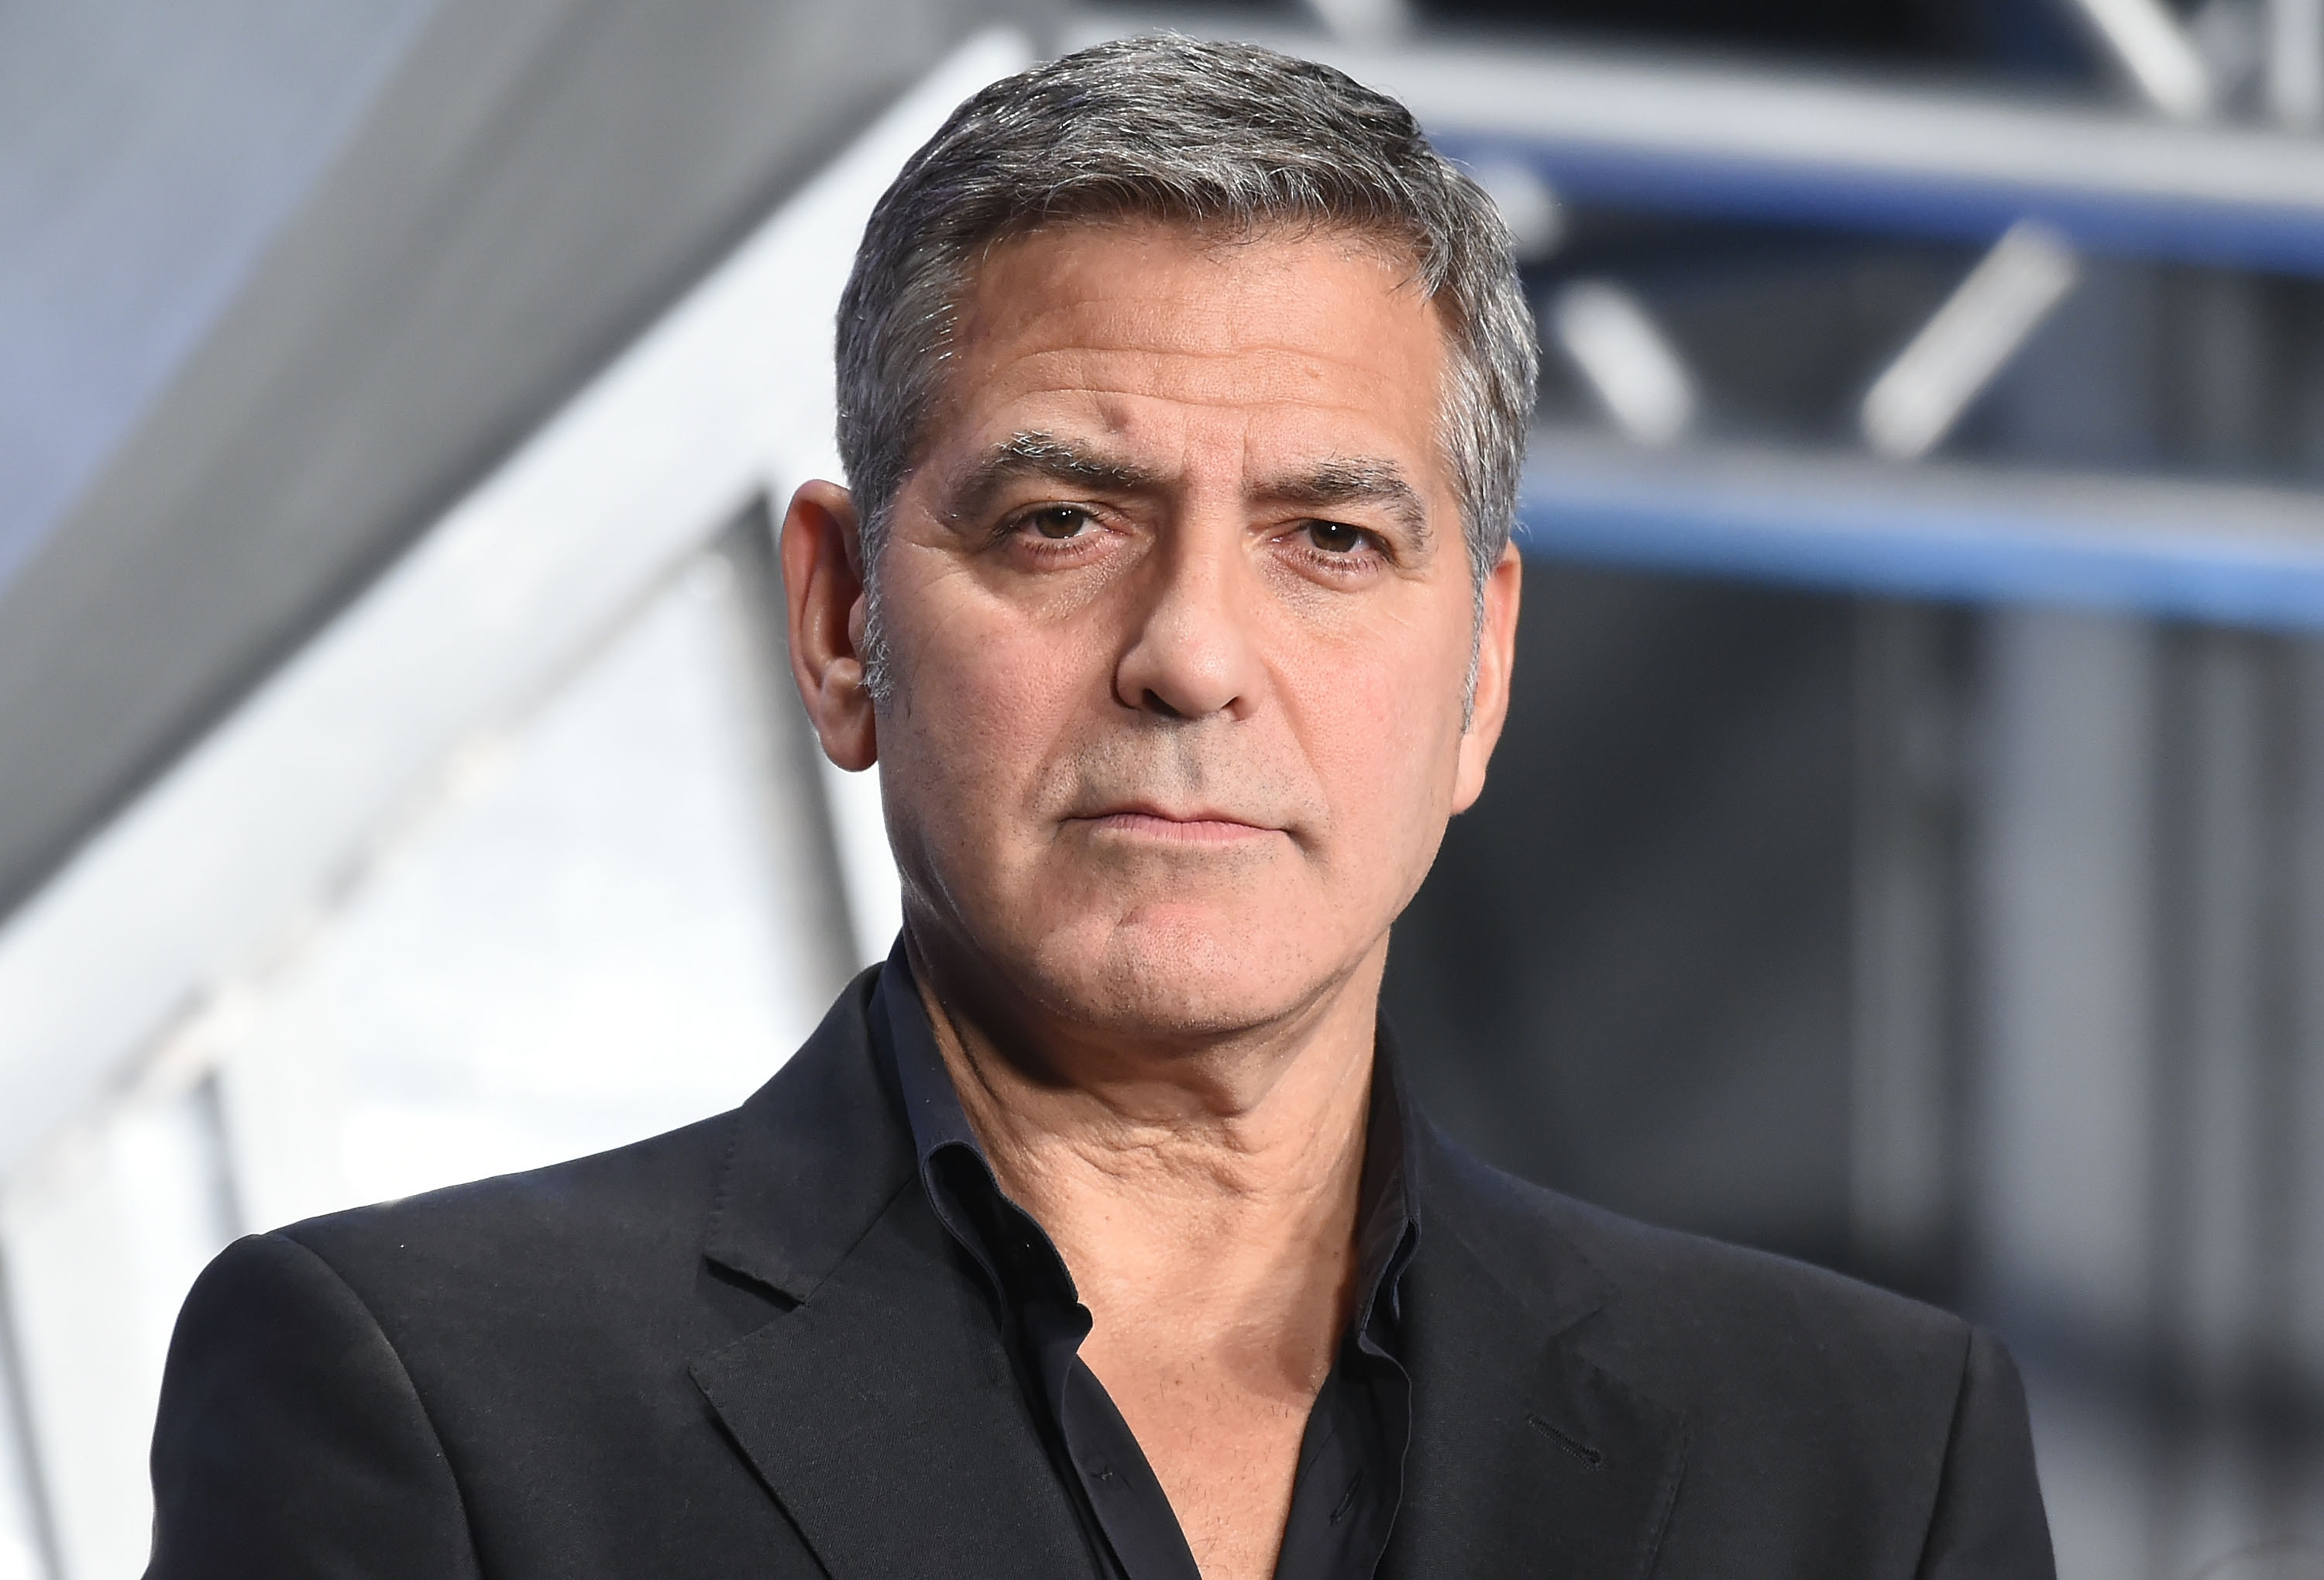 George Clooney attends the Tokyo premiere of "Tomorrowland" at Roppongi Hills on May 25, 2015 in Tokyo, Japan. (Jun Sato&mdash;WireImage)